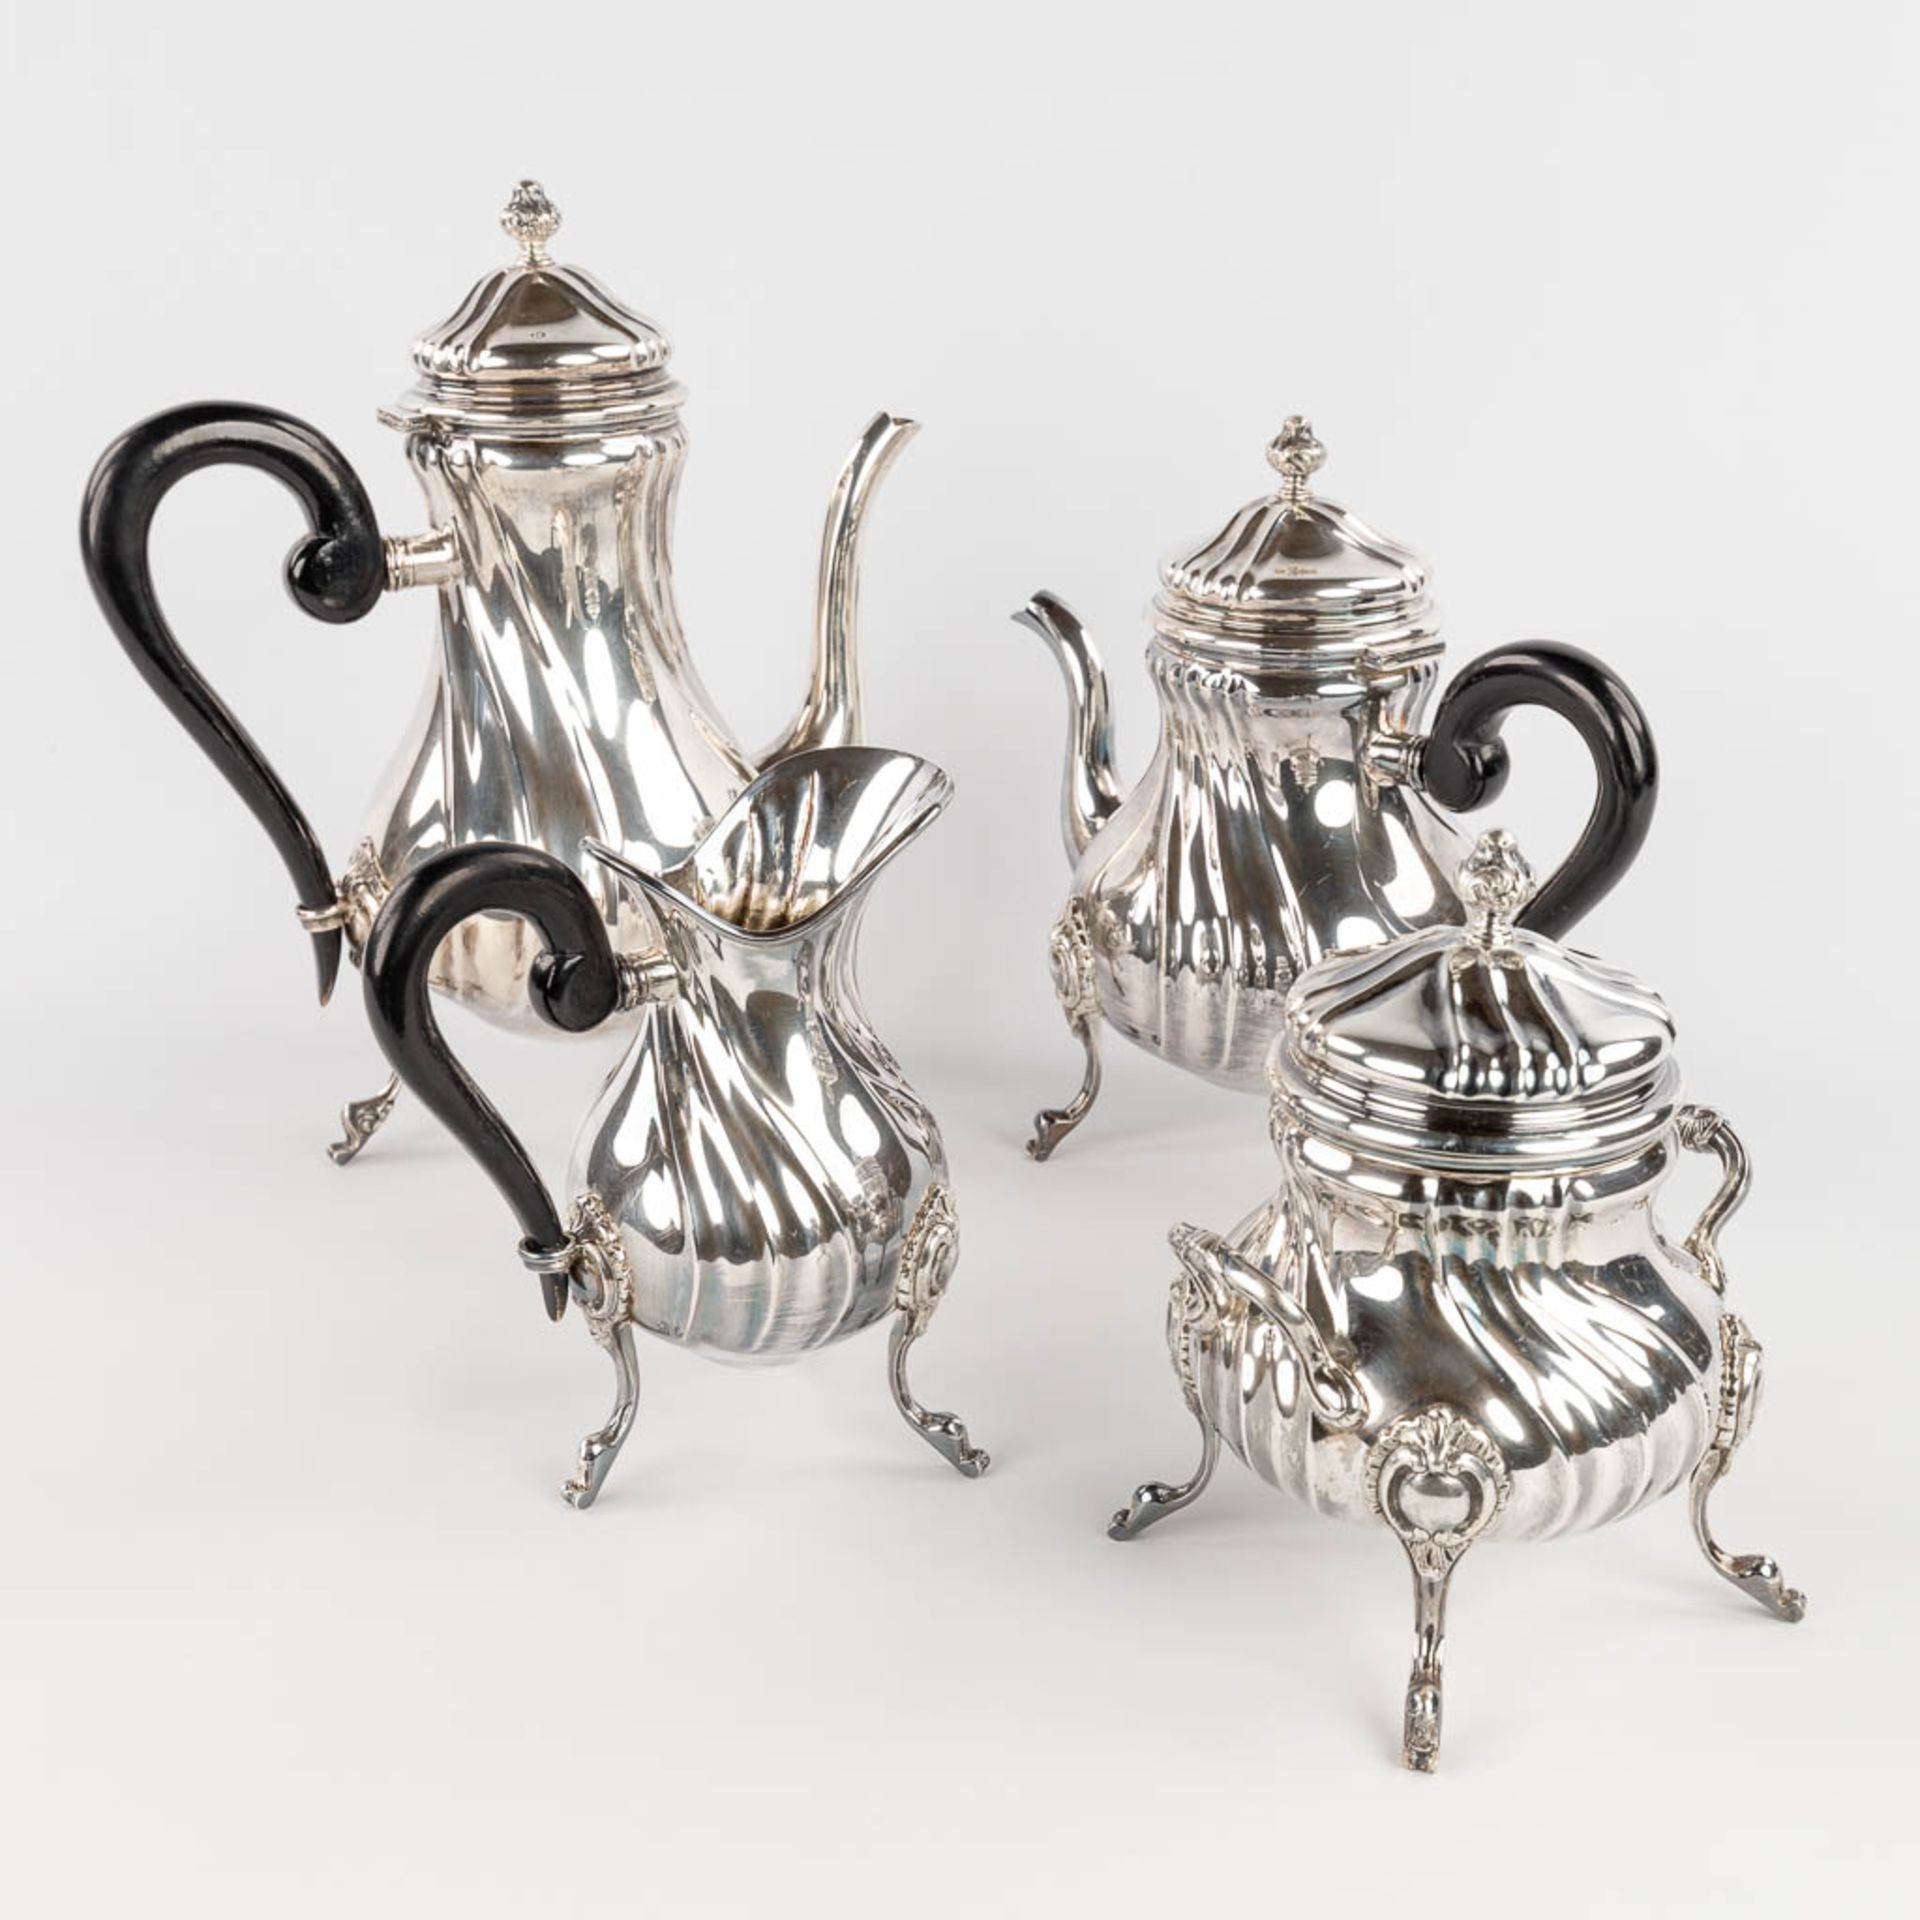 A coffee and tea service, Silver, 3,126kg. (H: 31 cm)